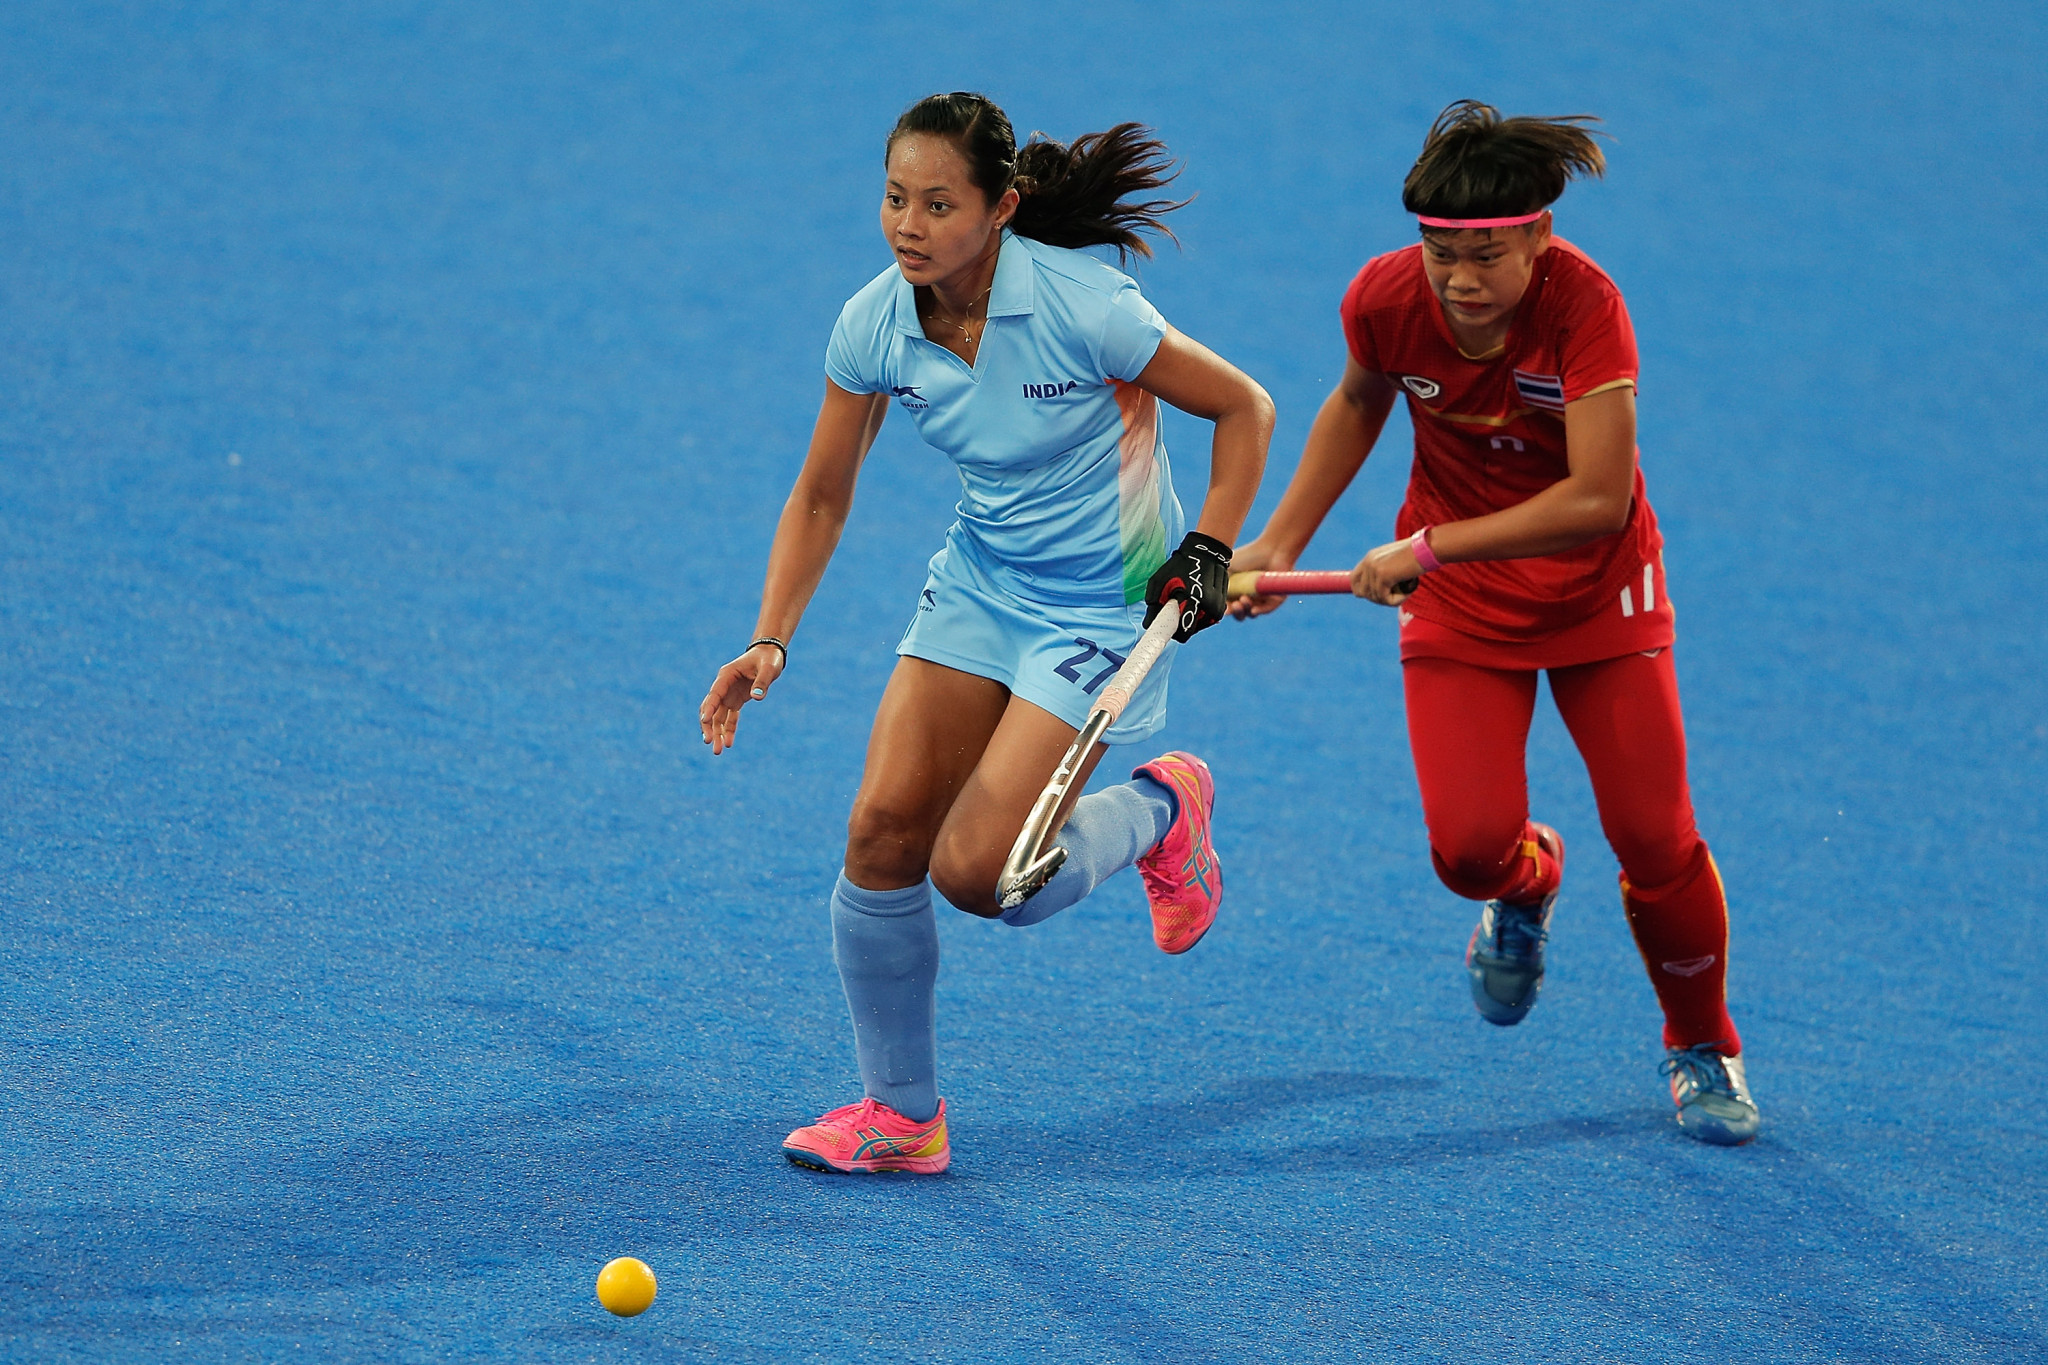 Indian women's hockey player Chanu confident of Tokyo 2020 qualification